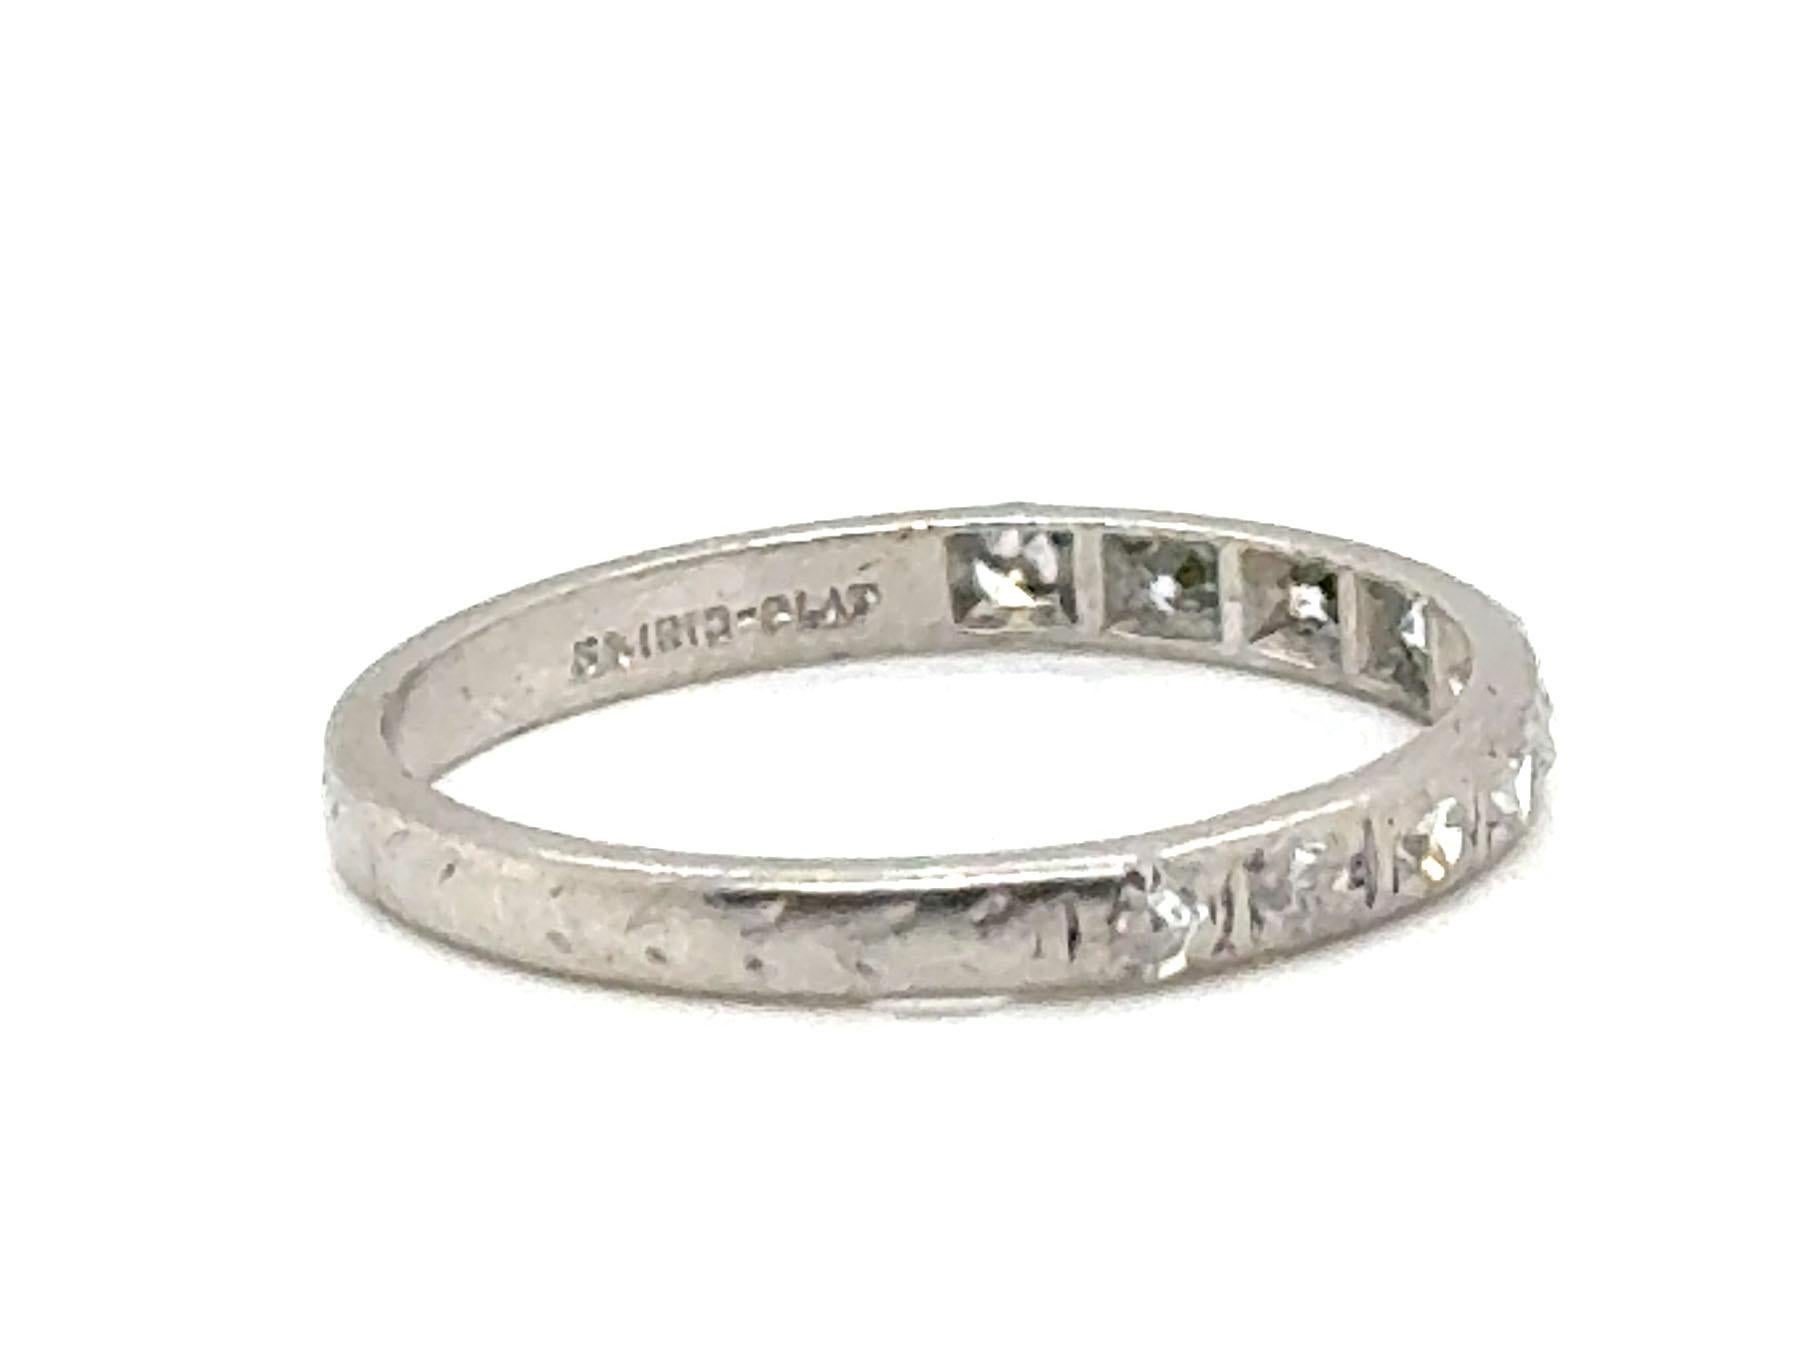 Genuine Original Antique Art Deco from 1920s Anniversary Band .25ct Diamond Platinum Wedding Ring 



Features 10 Matching Clean and Colorless Natural Antique Single Cut Diamonds

100% Natural Diamonds

Engraving on Shank Shows Some Signs of